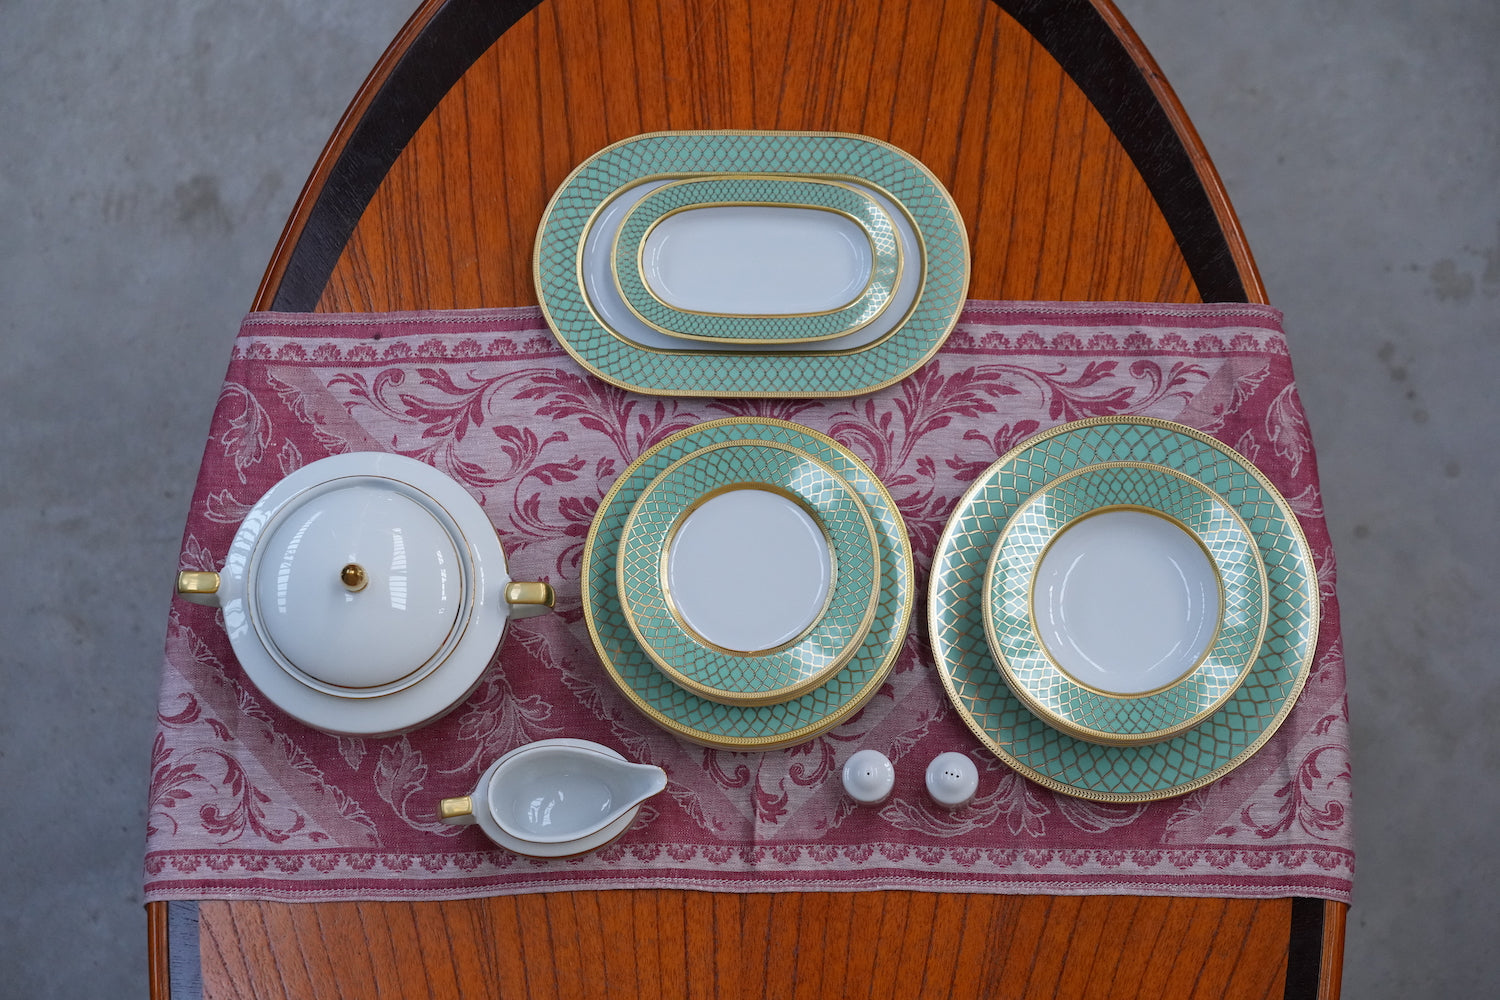 Six person porcelain set; breakfast, soup and dinner